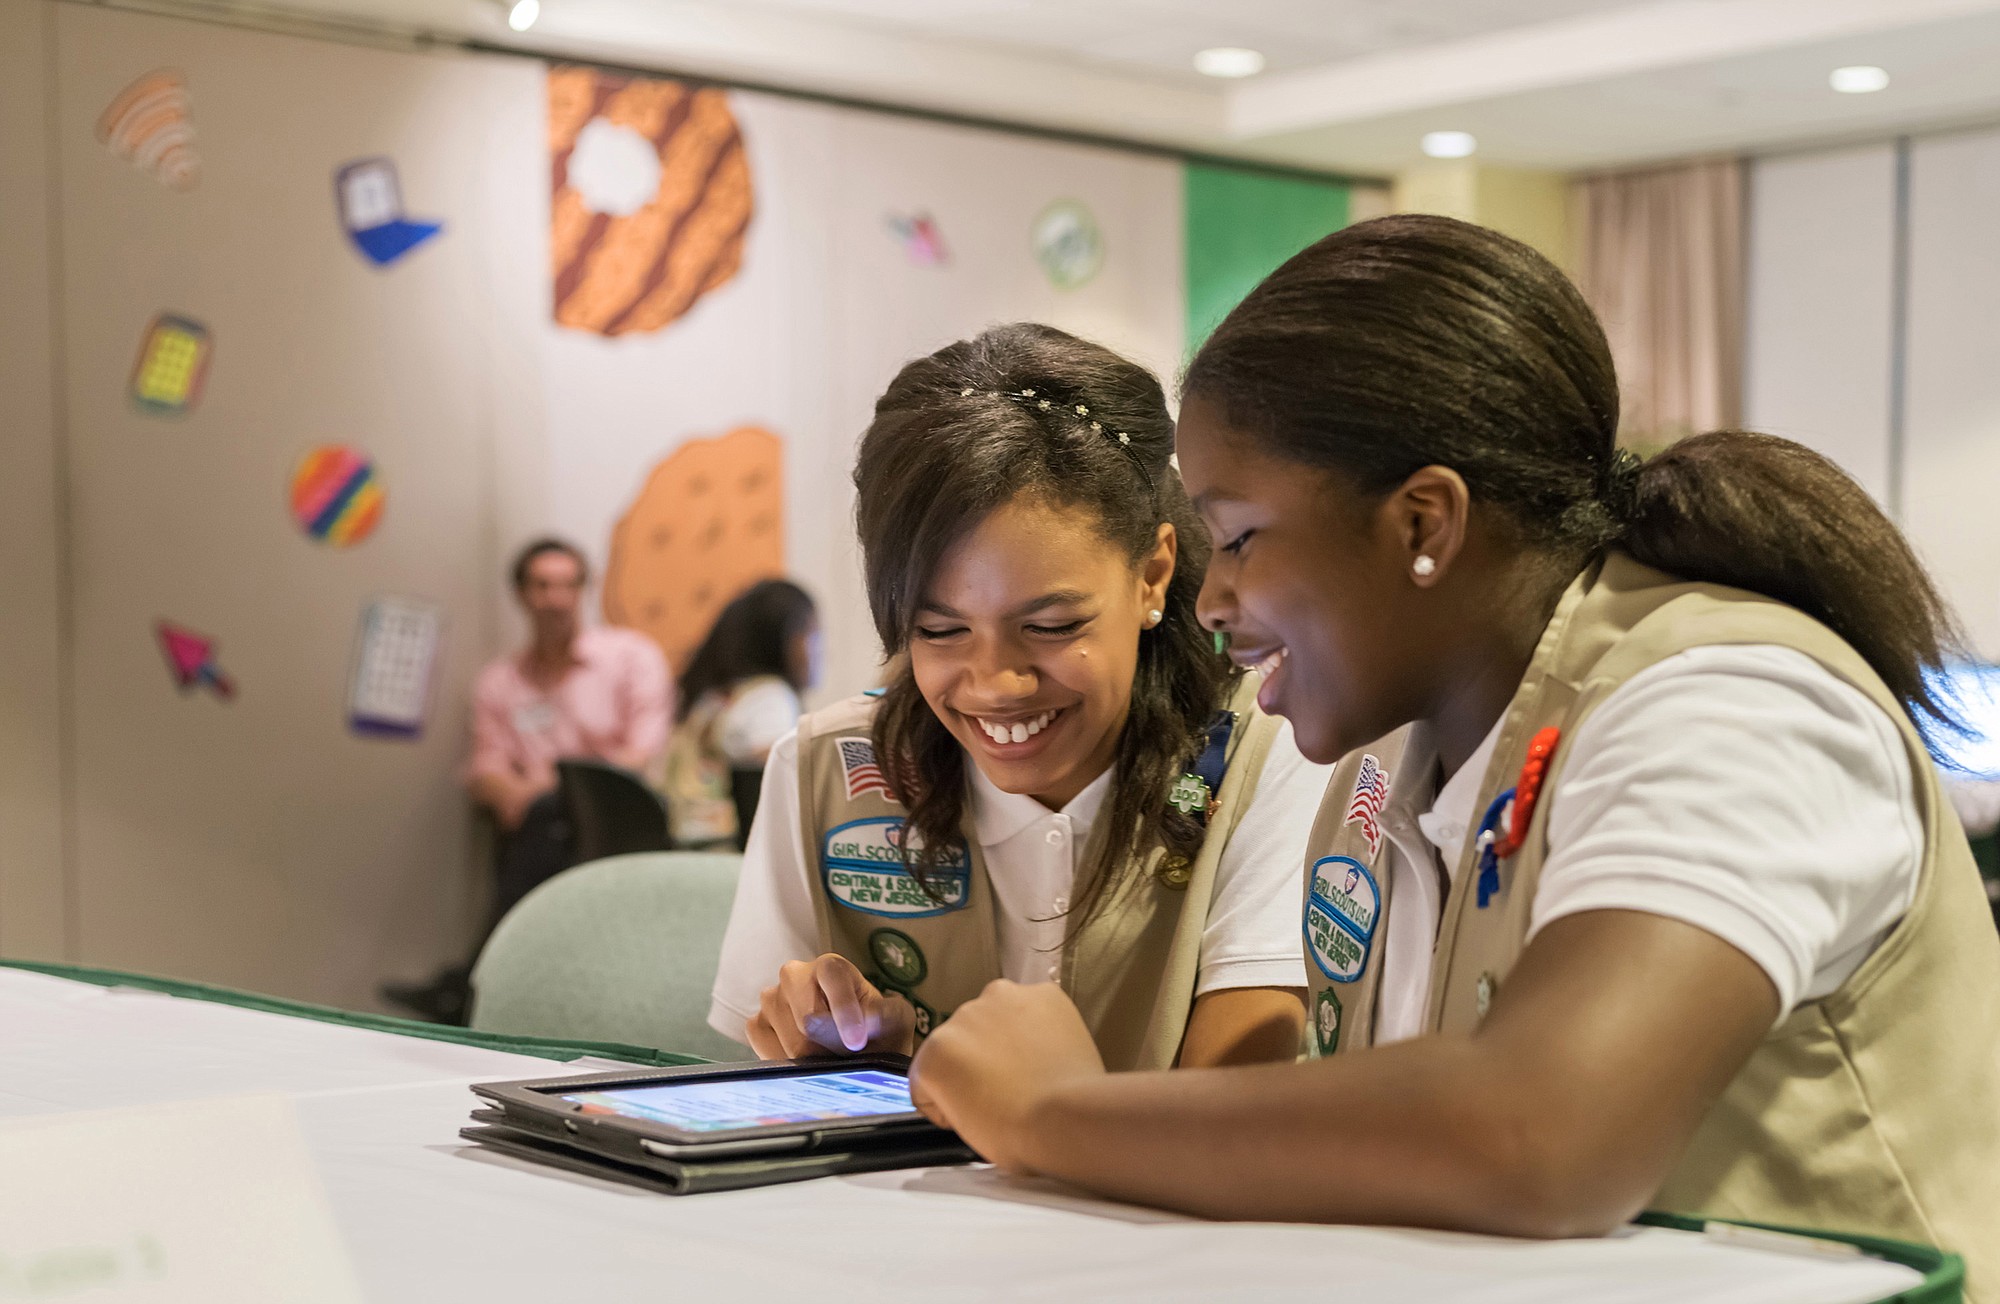 Girl Scouts of the USA
Girl Scouts Bria and Shirell practice selling cookies on one of two new digital platforms, as mobile apps and personalized websites are now allowed for sales.